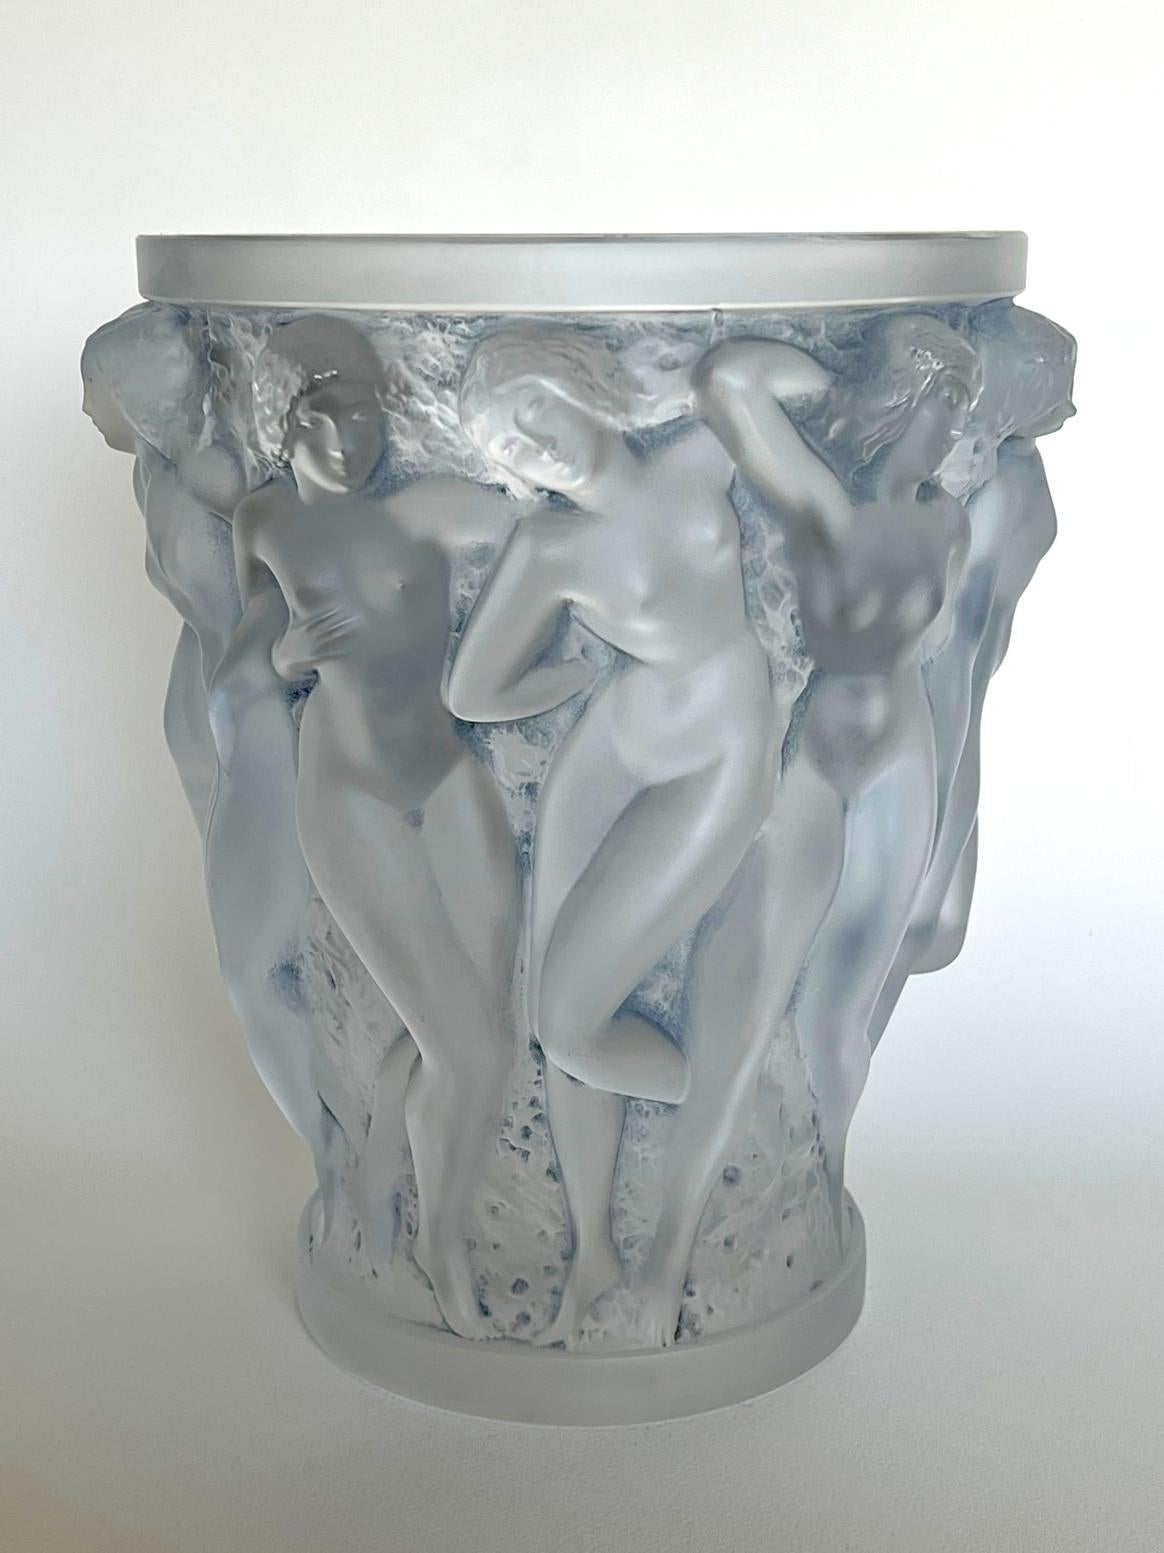 Introduced in 1927, the 'Bacchantes' vase has become an iconic design in the repertoire of one of France's leading exponents of Art Déco.
This vase is of frosted 'demi-cristal' with traces of the original blue enamel patina. Moulded in relief with a